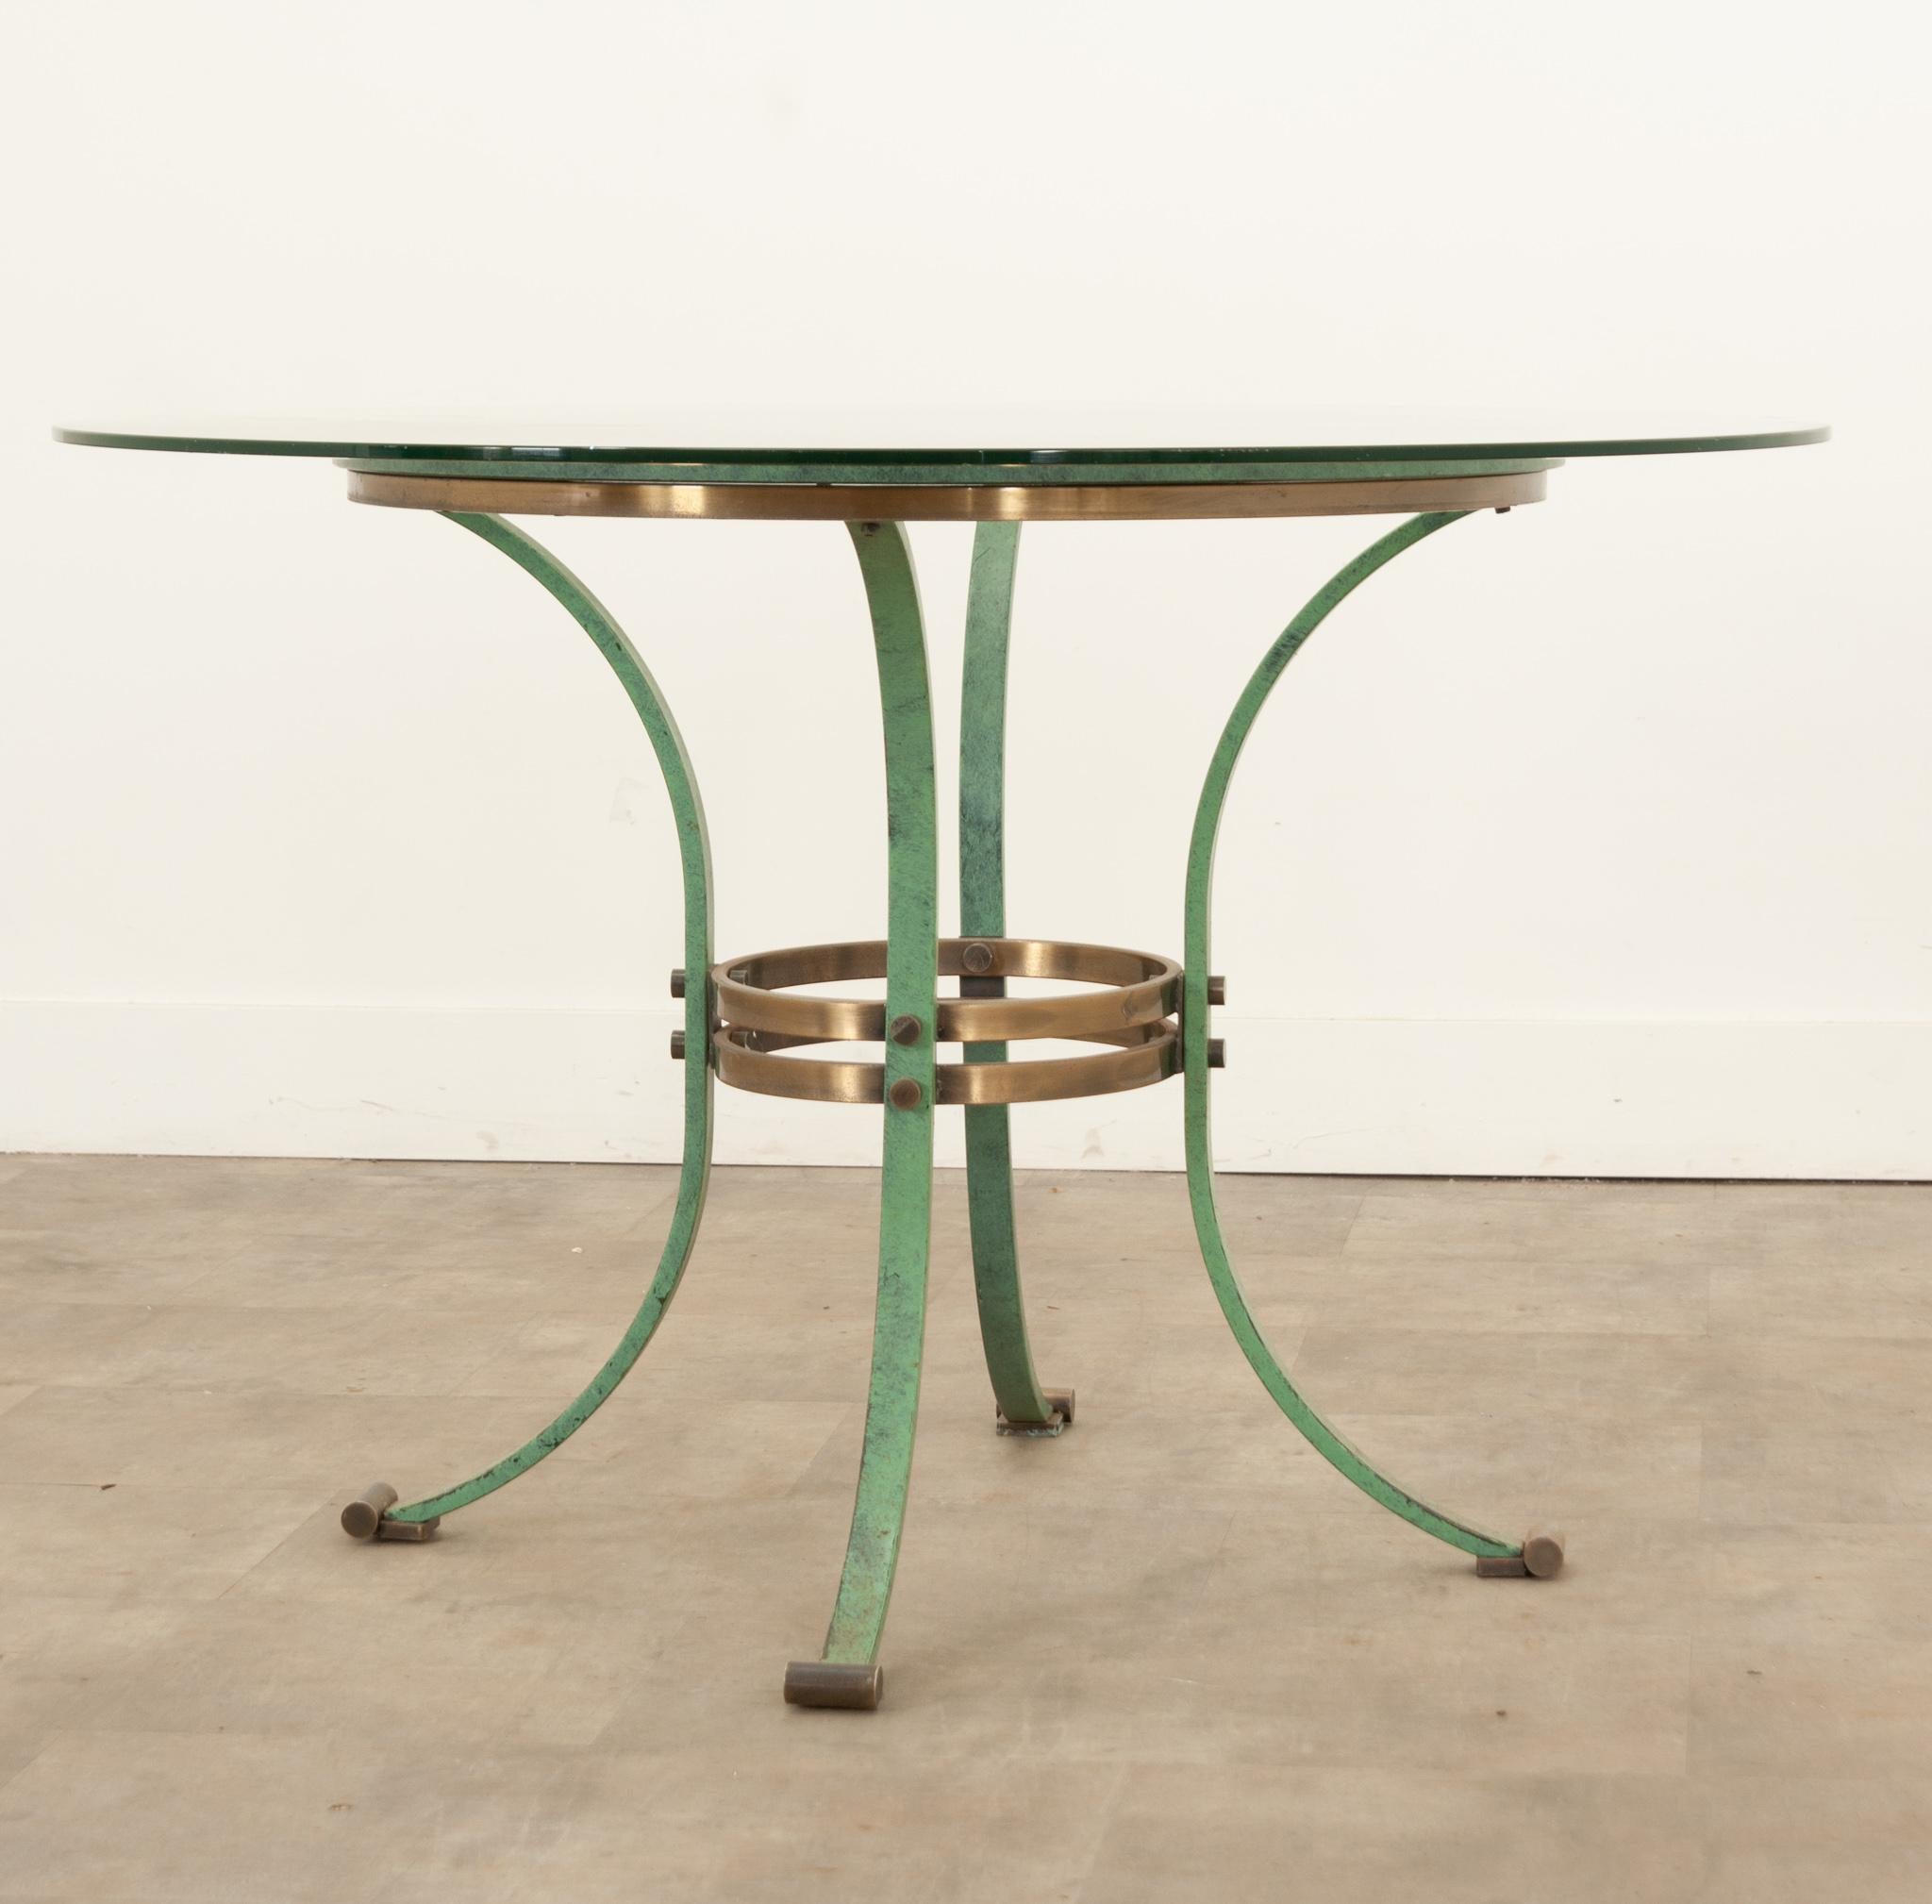 An eye-catching French Mid-Century pedestal dining table with removable beveled glass top, painted patina finish, and brass pedestal base. A beautiful round glass top with a beveled edge is supported by a circular brass pedestal base connected to